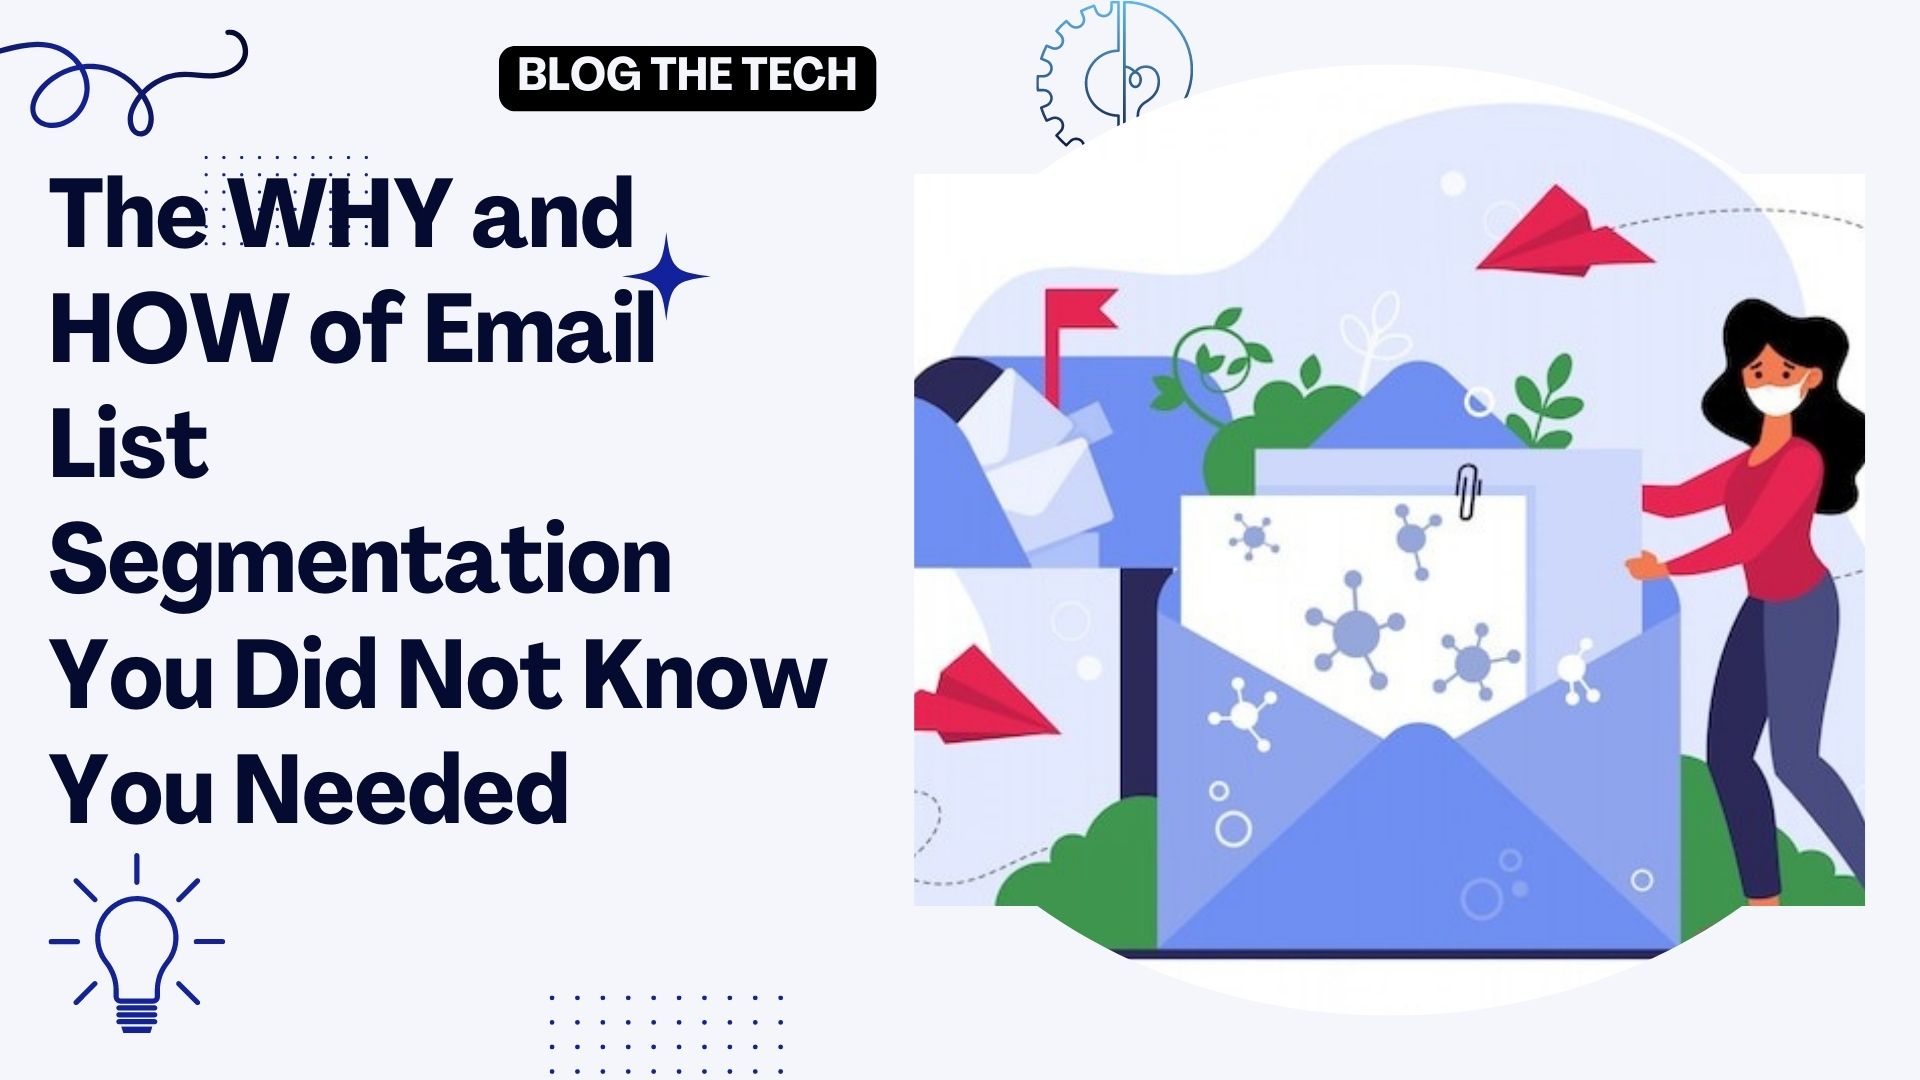 the why and how of email list segmentation you did not know you needed